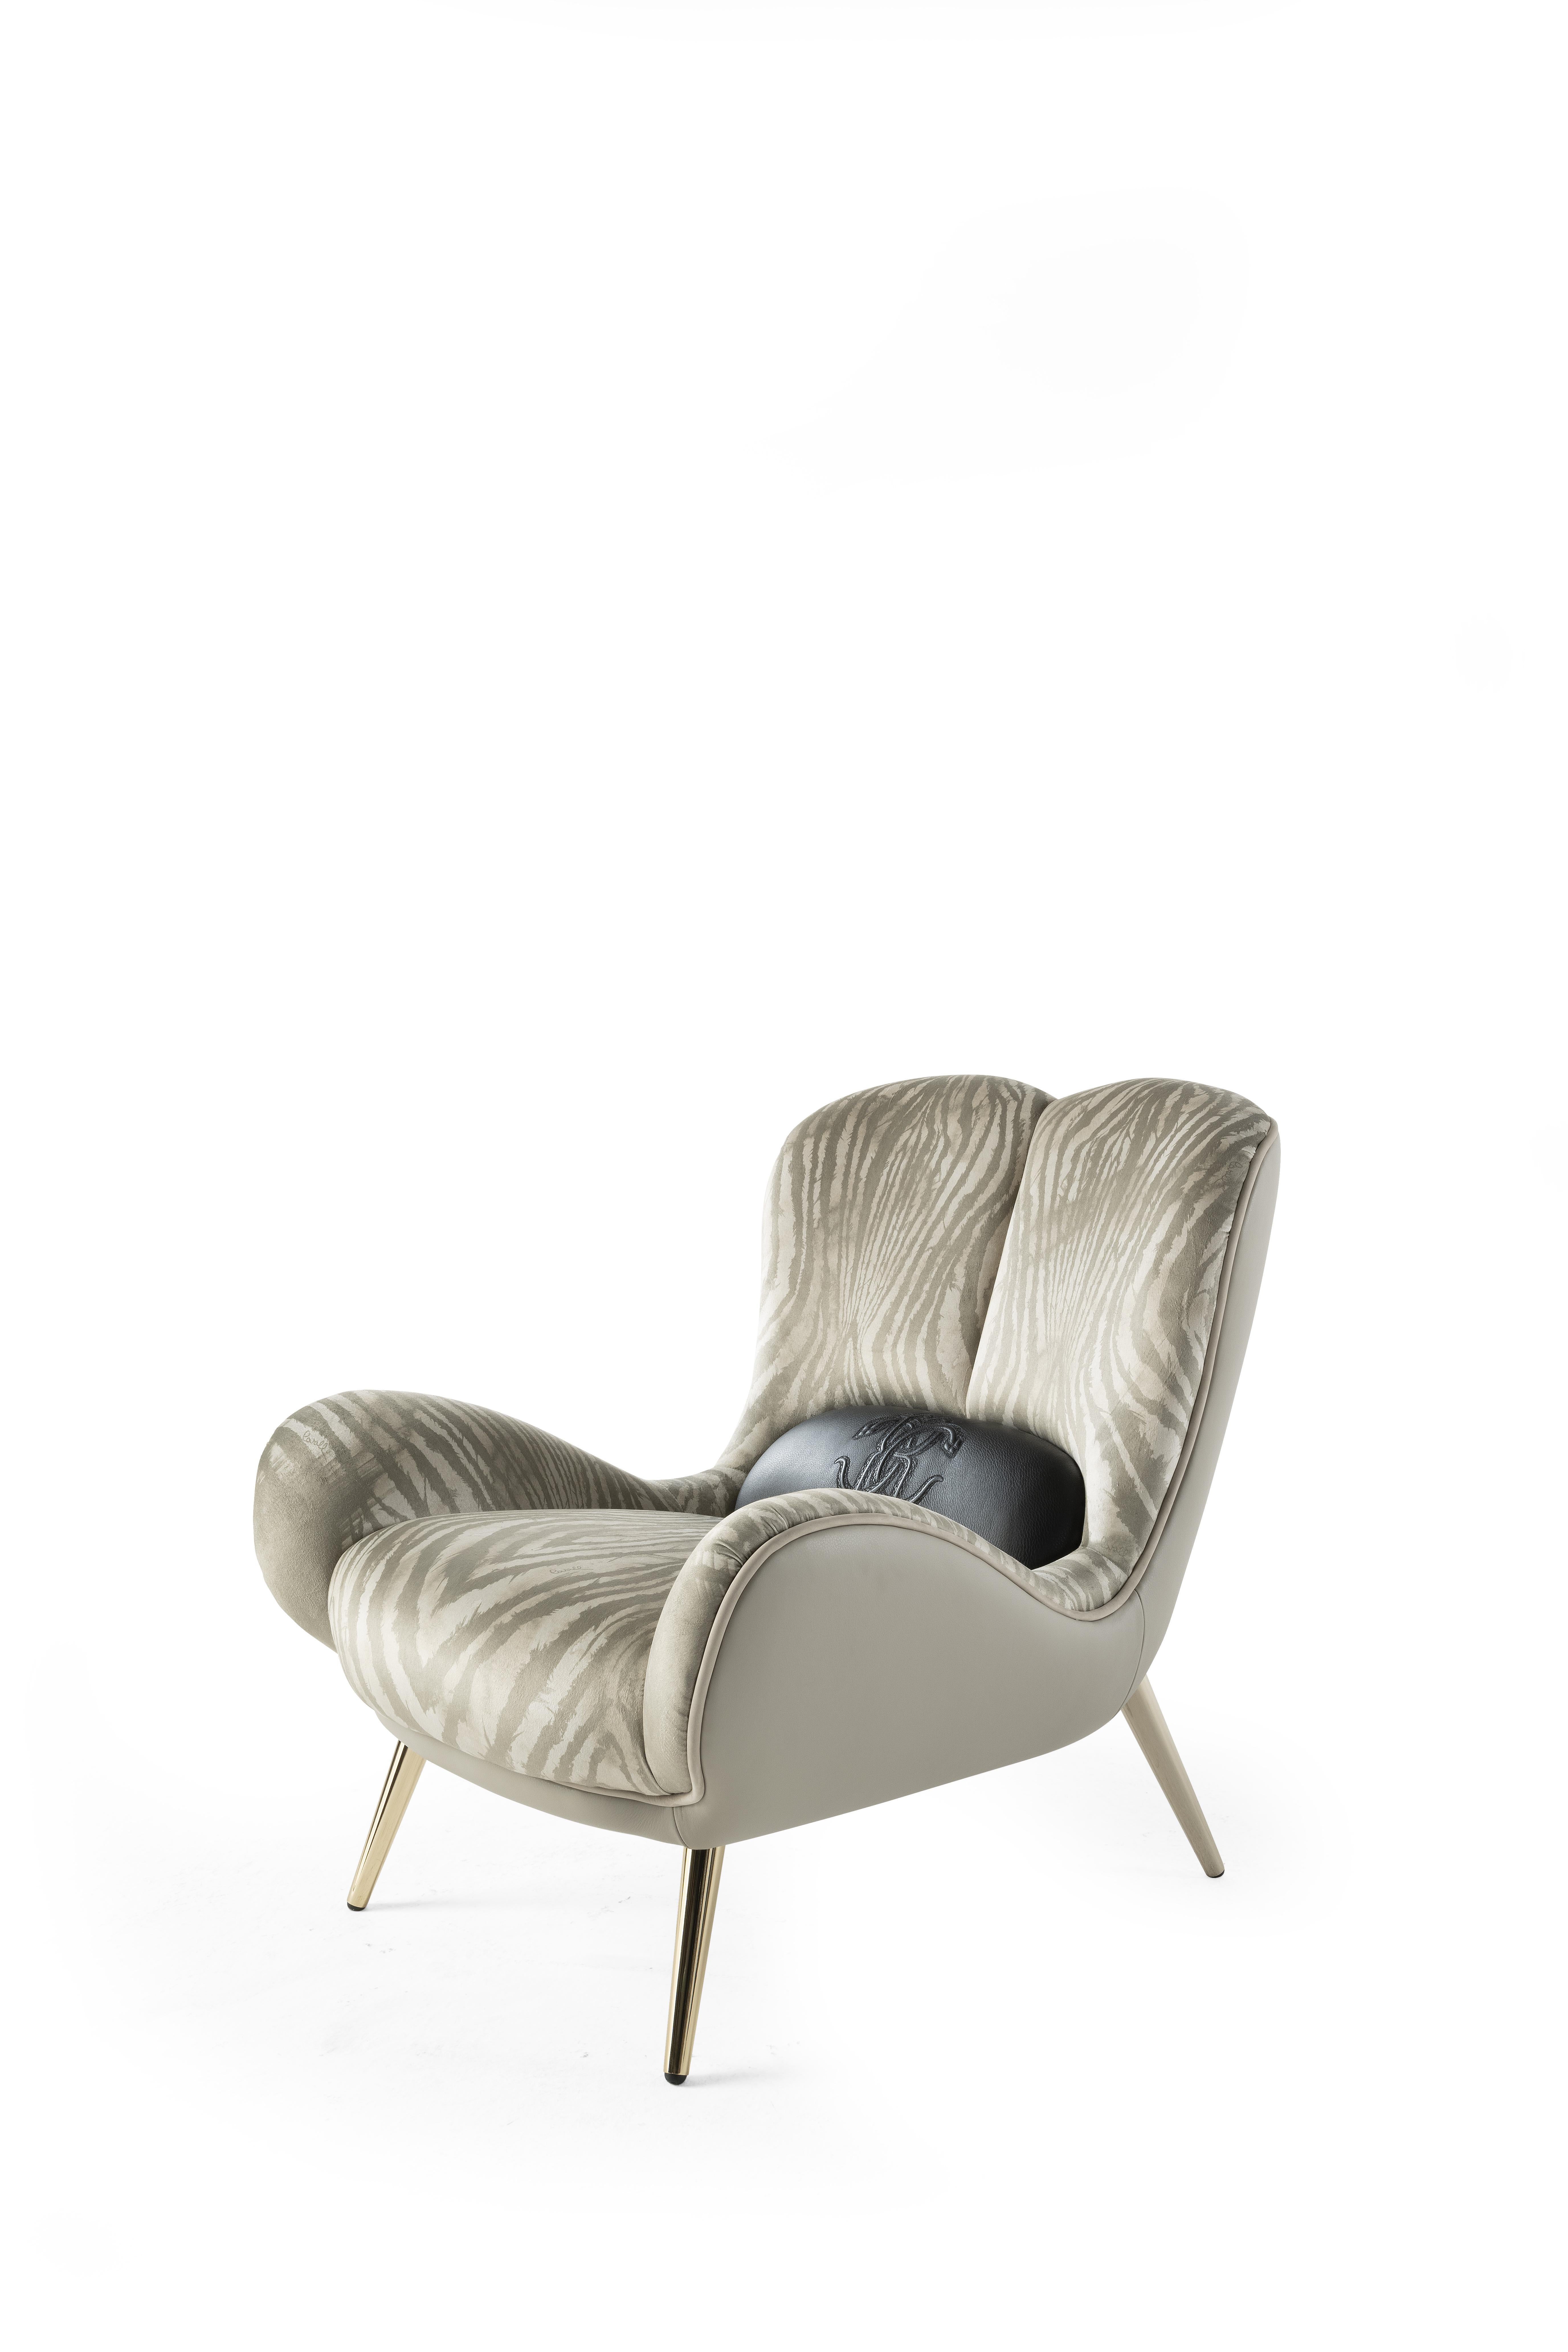 Soft shapes and exotic suggestions for the Tifnit armchair. The upholstery with the new Wild Zebra pattern evokes a wild and sensual spirit. The external structure upholstered in leather lends a gritty allure to the whole, while the glossy gold feet